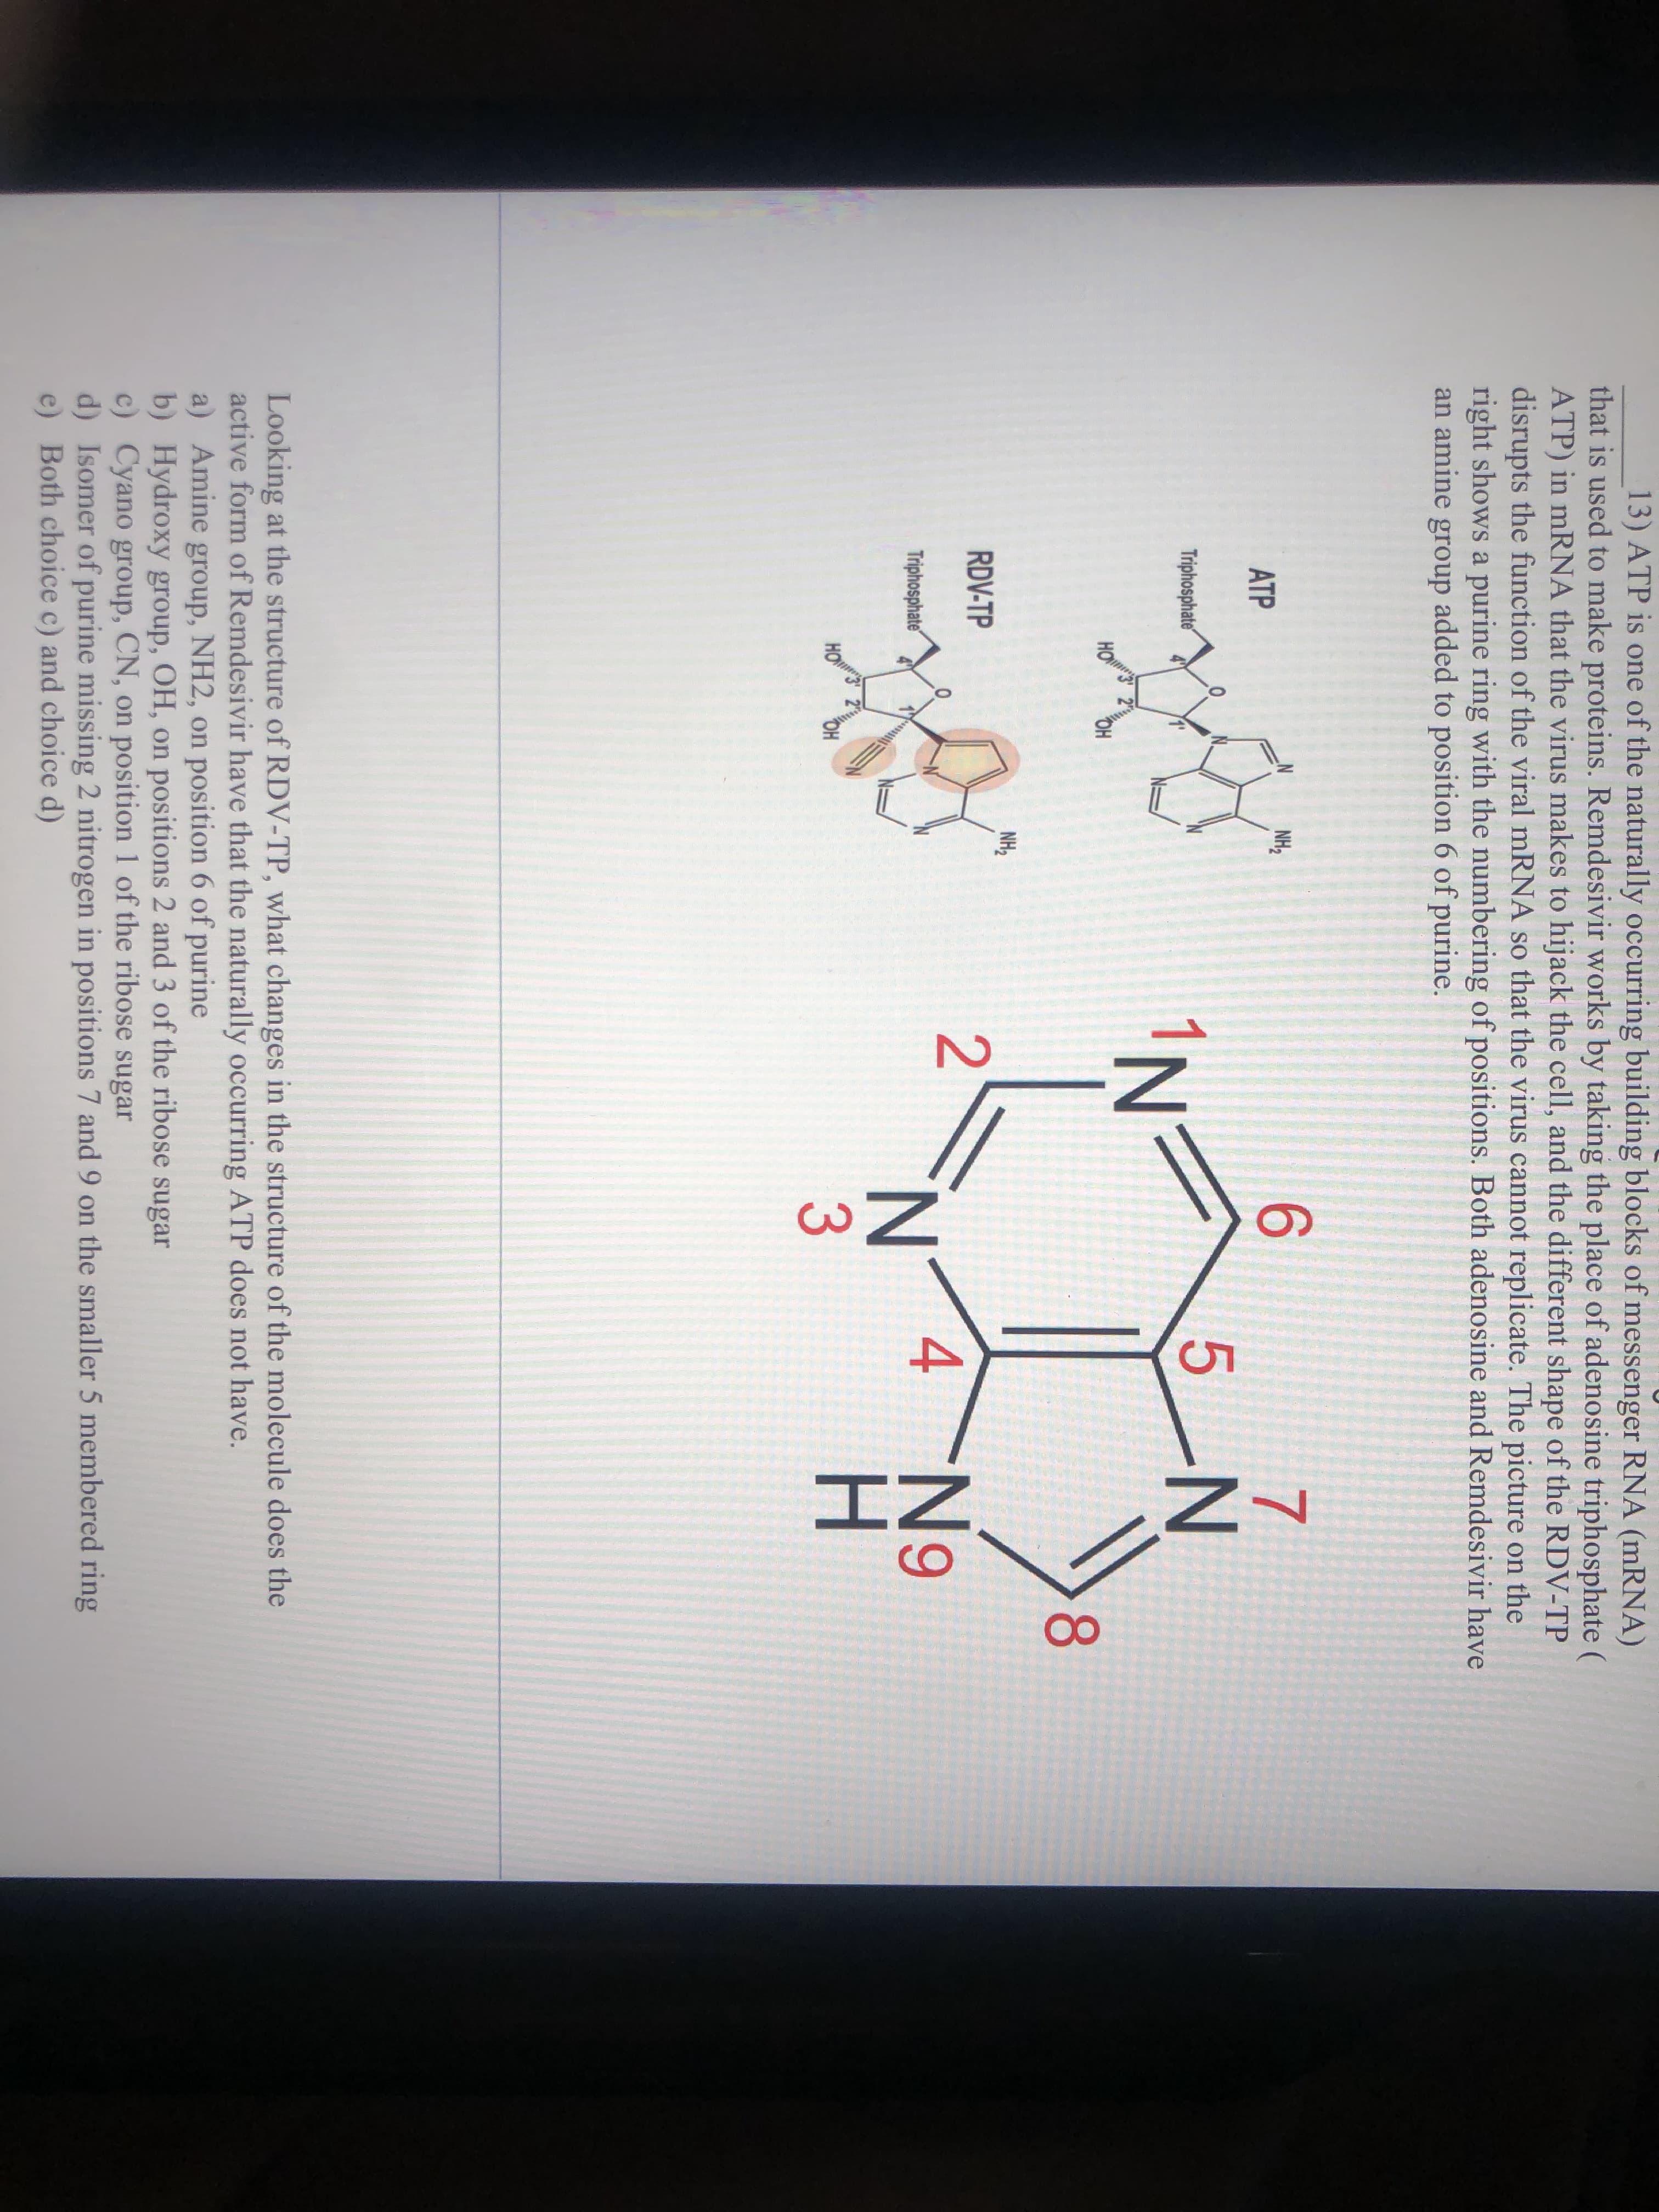 Looking at the structure of RDV-TP, what changes in the structure of the molecule does the
active form of Remdesivir have that the naturally occurring ATP does not have.
a) Amine group, NH2, on position 6 of purine
